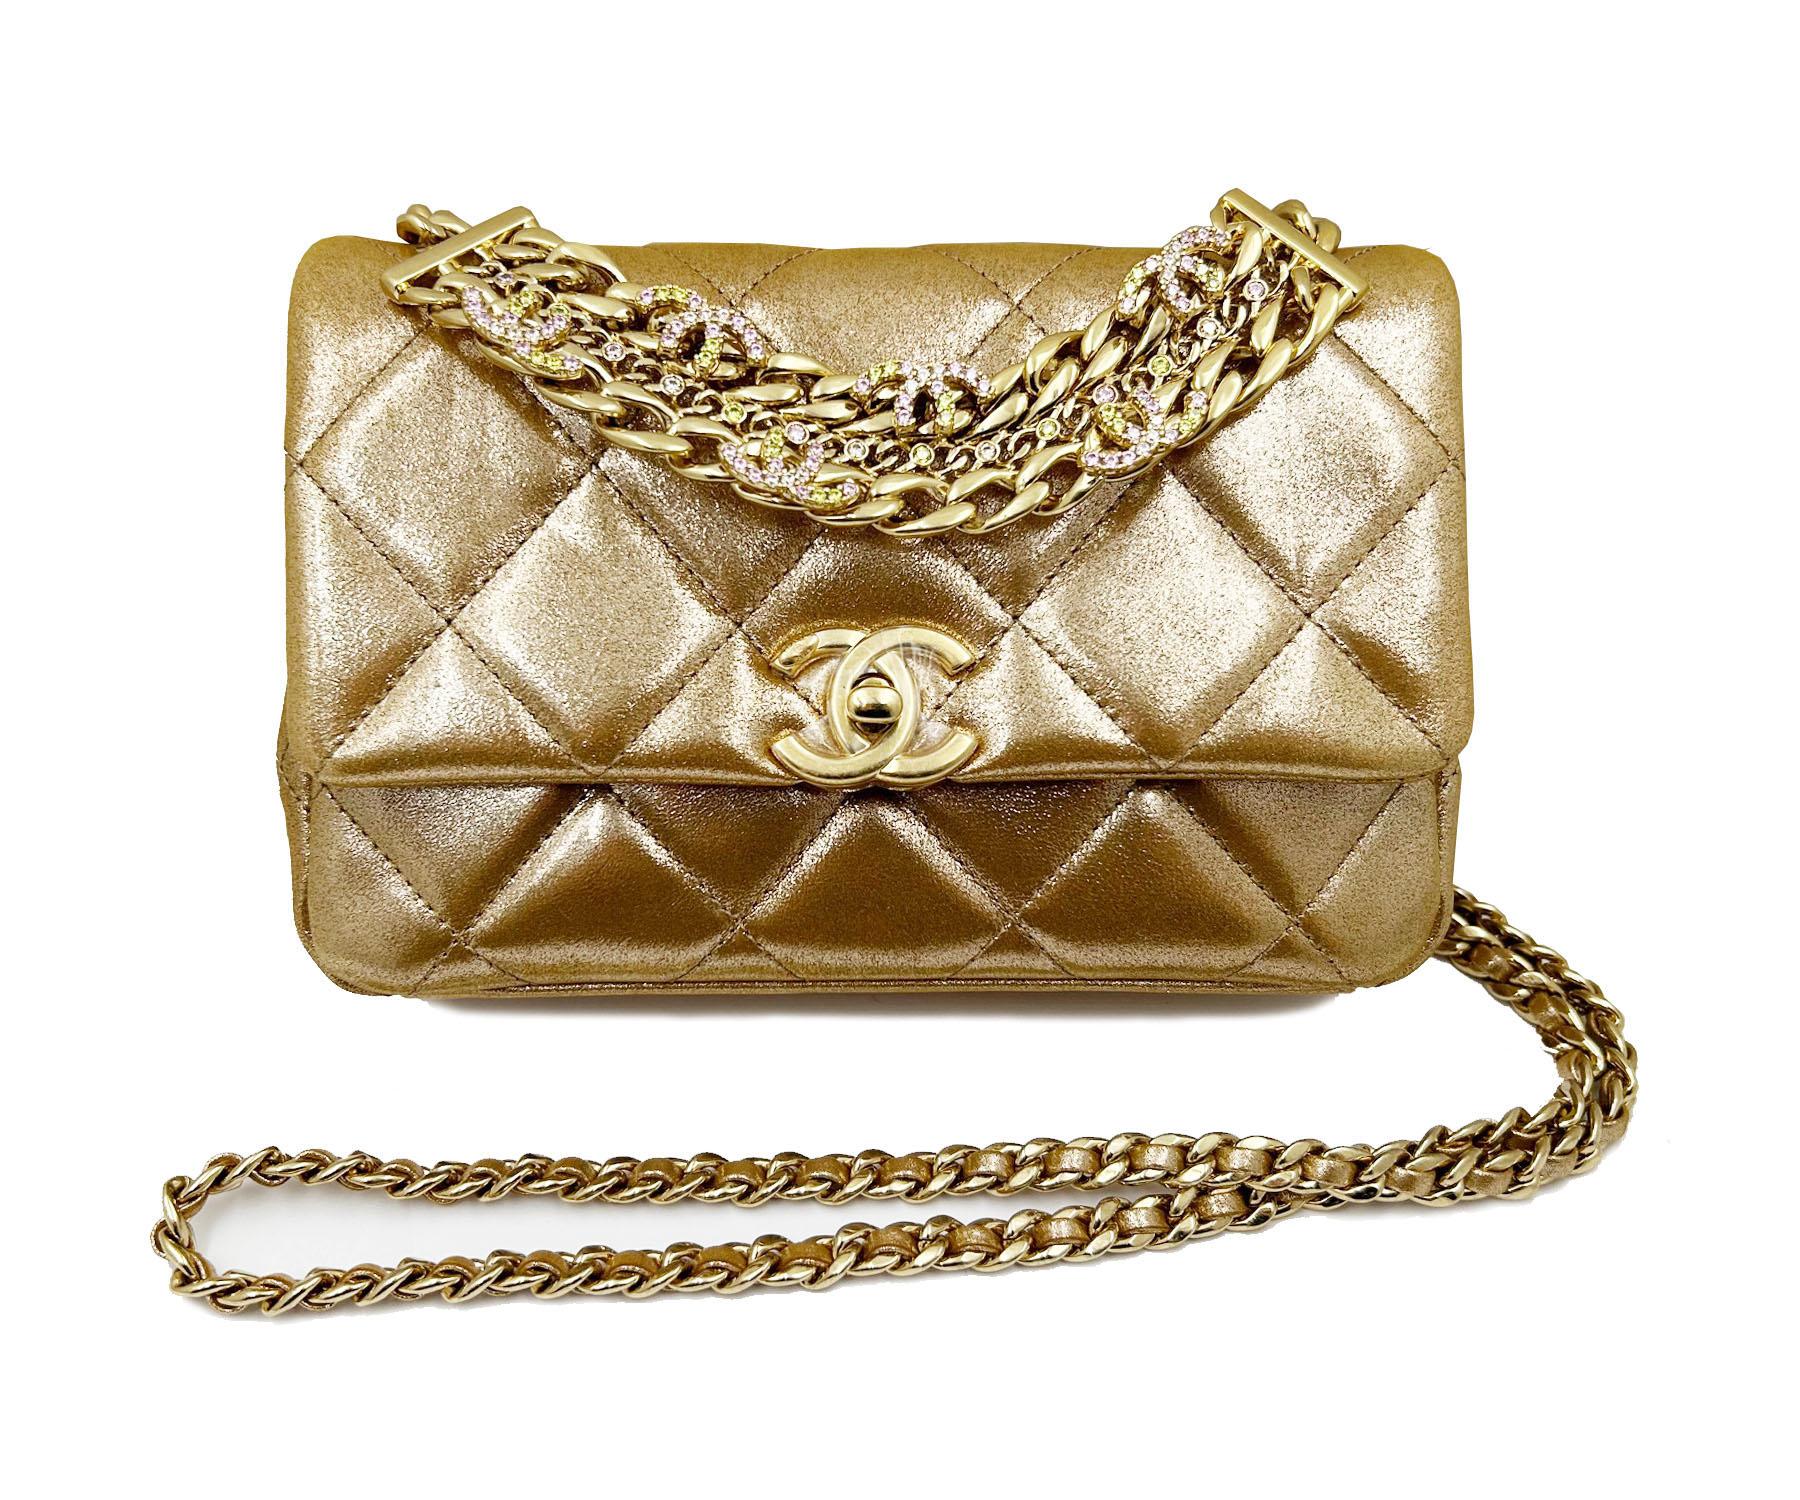 Chanel Gold Shimmer Crystal CC Handle Crossbody 2 Way Bag

* Marked JHKxxxxx
* Made in Italy
* Comes with the original box, dustbag, booklet, camellia and ribbon. A copy of receipt is upon request.
* Brand New

-It is approximately 7.5